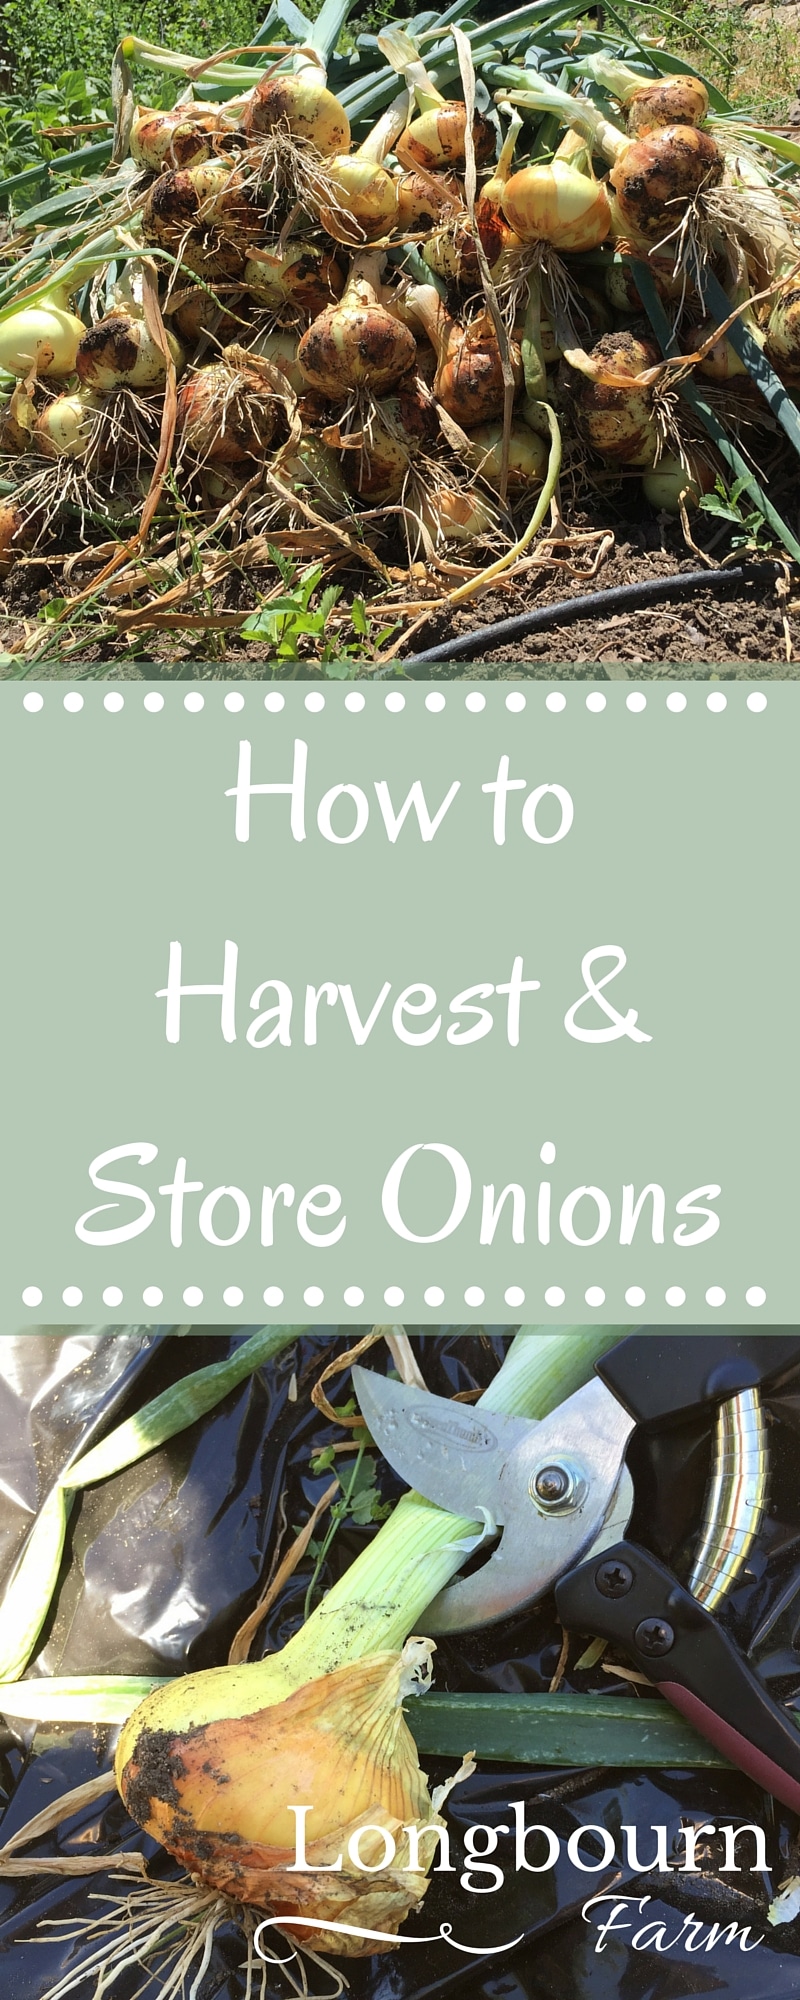 Harvesting onions is so easy, and storing onions is so easy too! Easy to follow steps so you can enjoy your harvest for months!